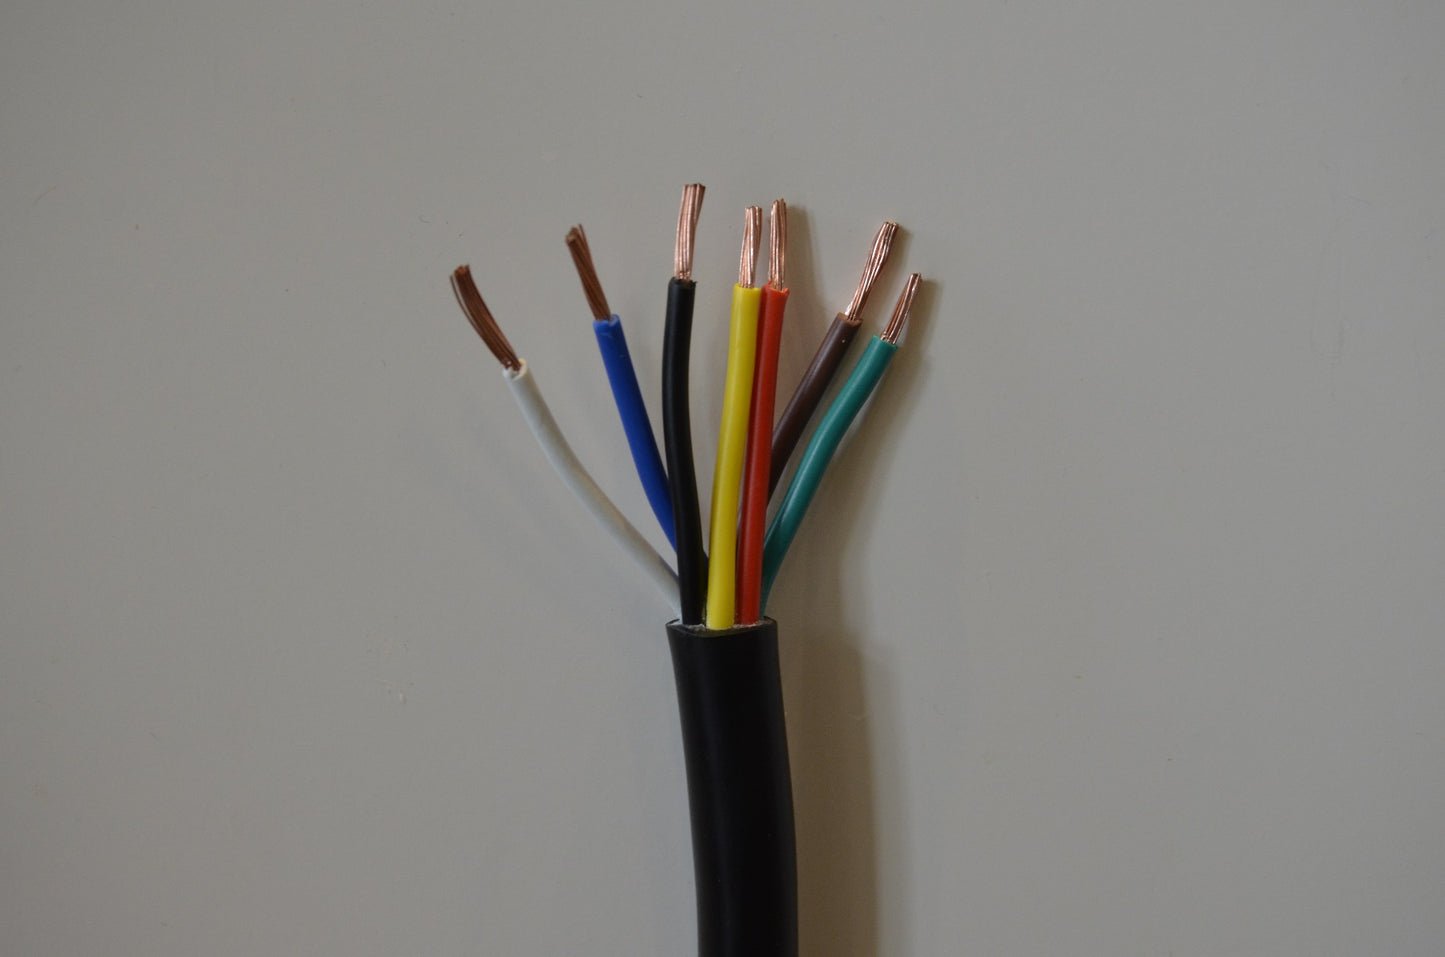 14 GA 7 Copper Trailer wire for electrical projects